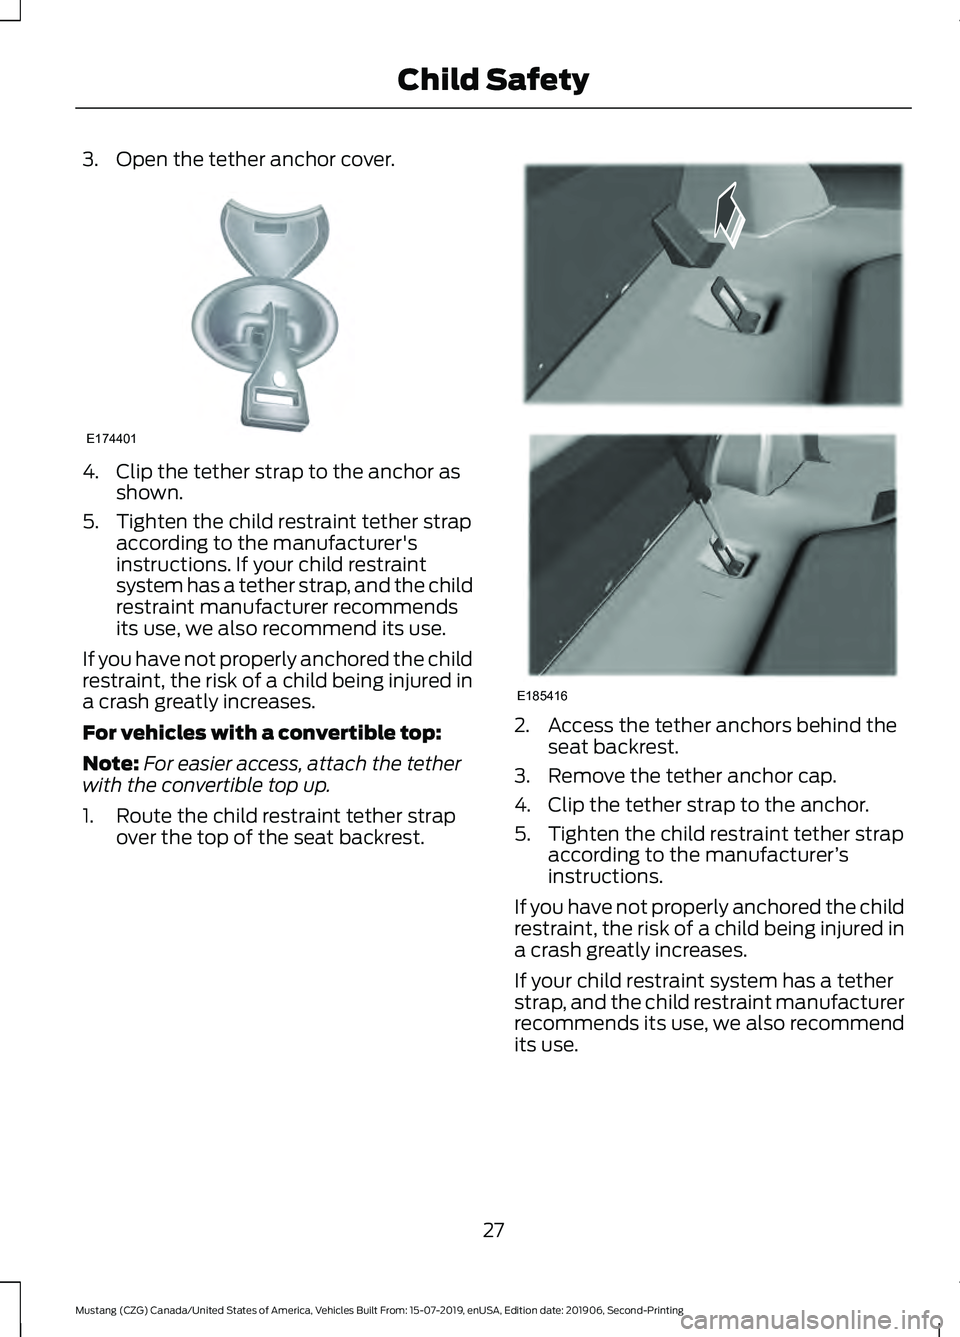 FORD MUSTANG 2020 Owners Manual 3. Open the tether anchor cover.
4. Clip the tether strap to the anchor as
shown.
5. Tighten the child restraint tether strap according to the manufacturer's
instructions. If your child restraint
